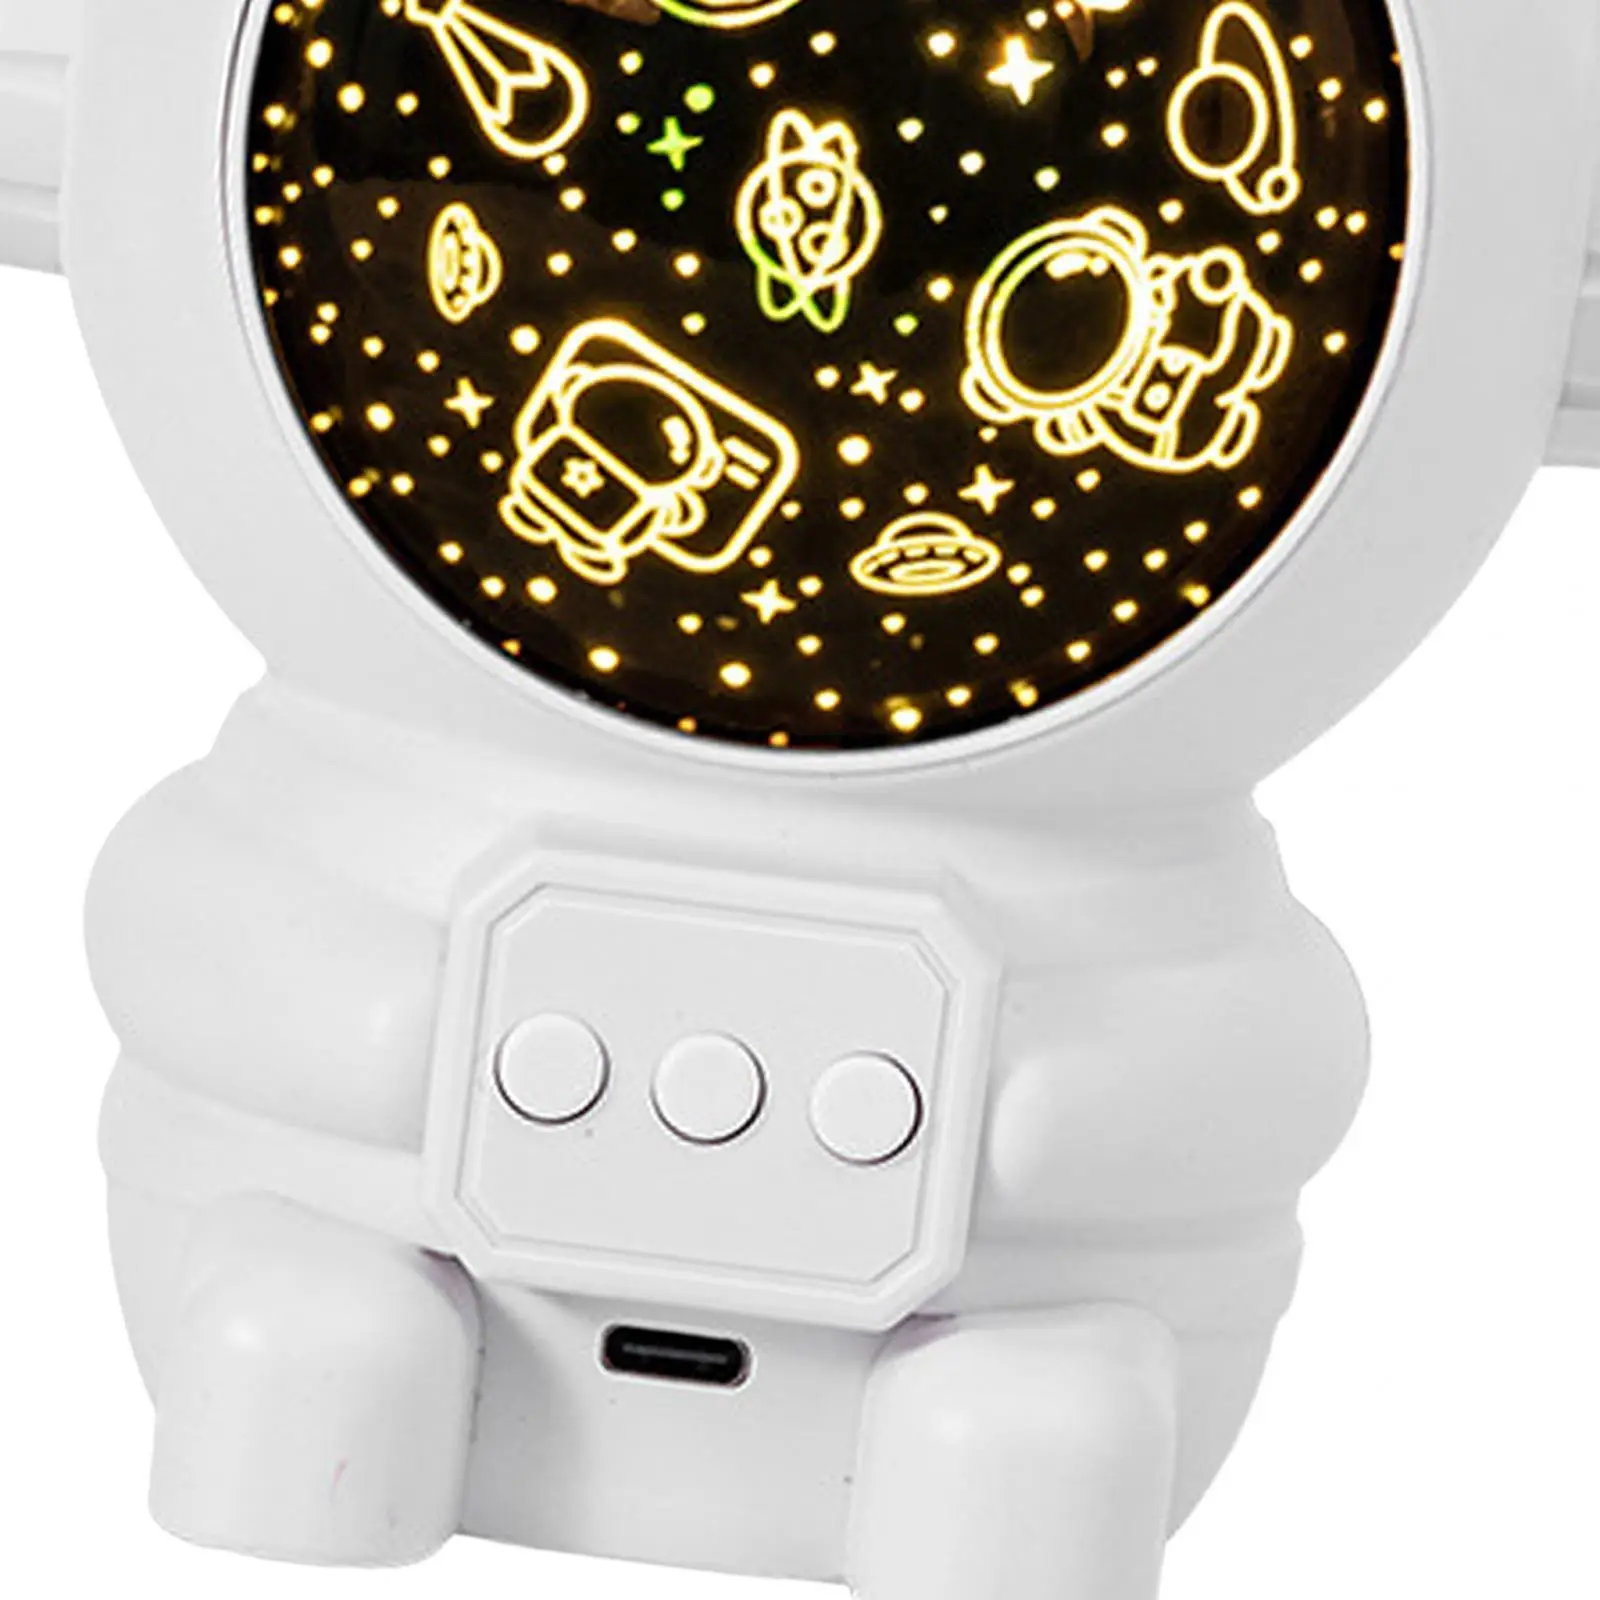 Astronaut Light Projector Decor Star Projector Galaxy Multicolor LED Lamp for Kids Bedroom Baby Toddlers Children Holiday Gift